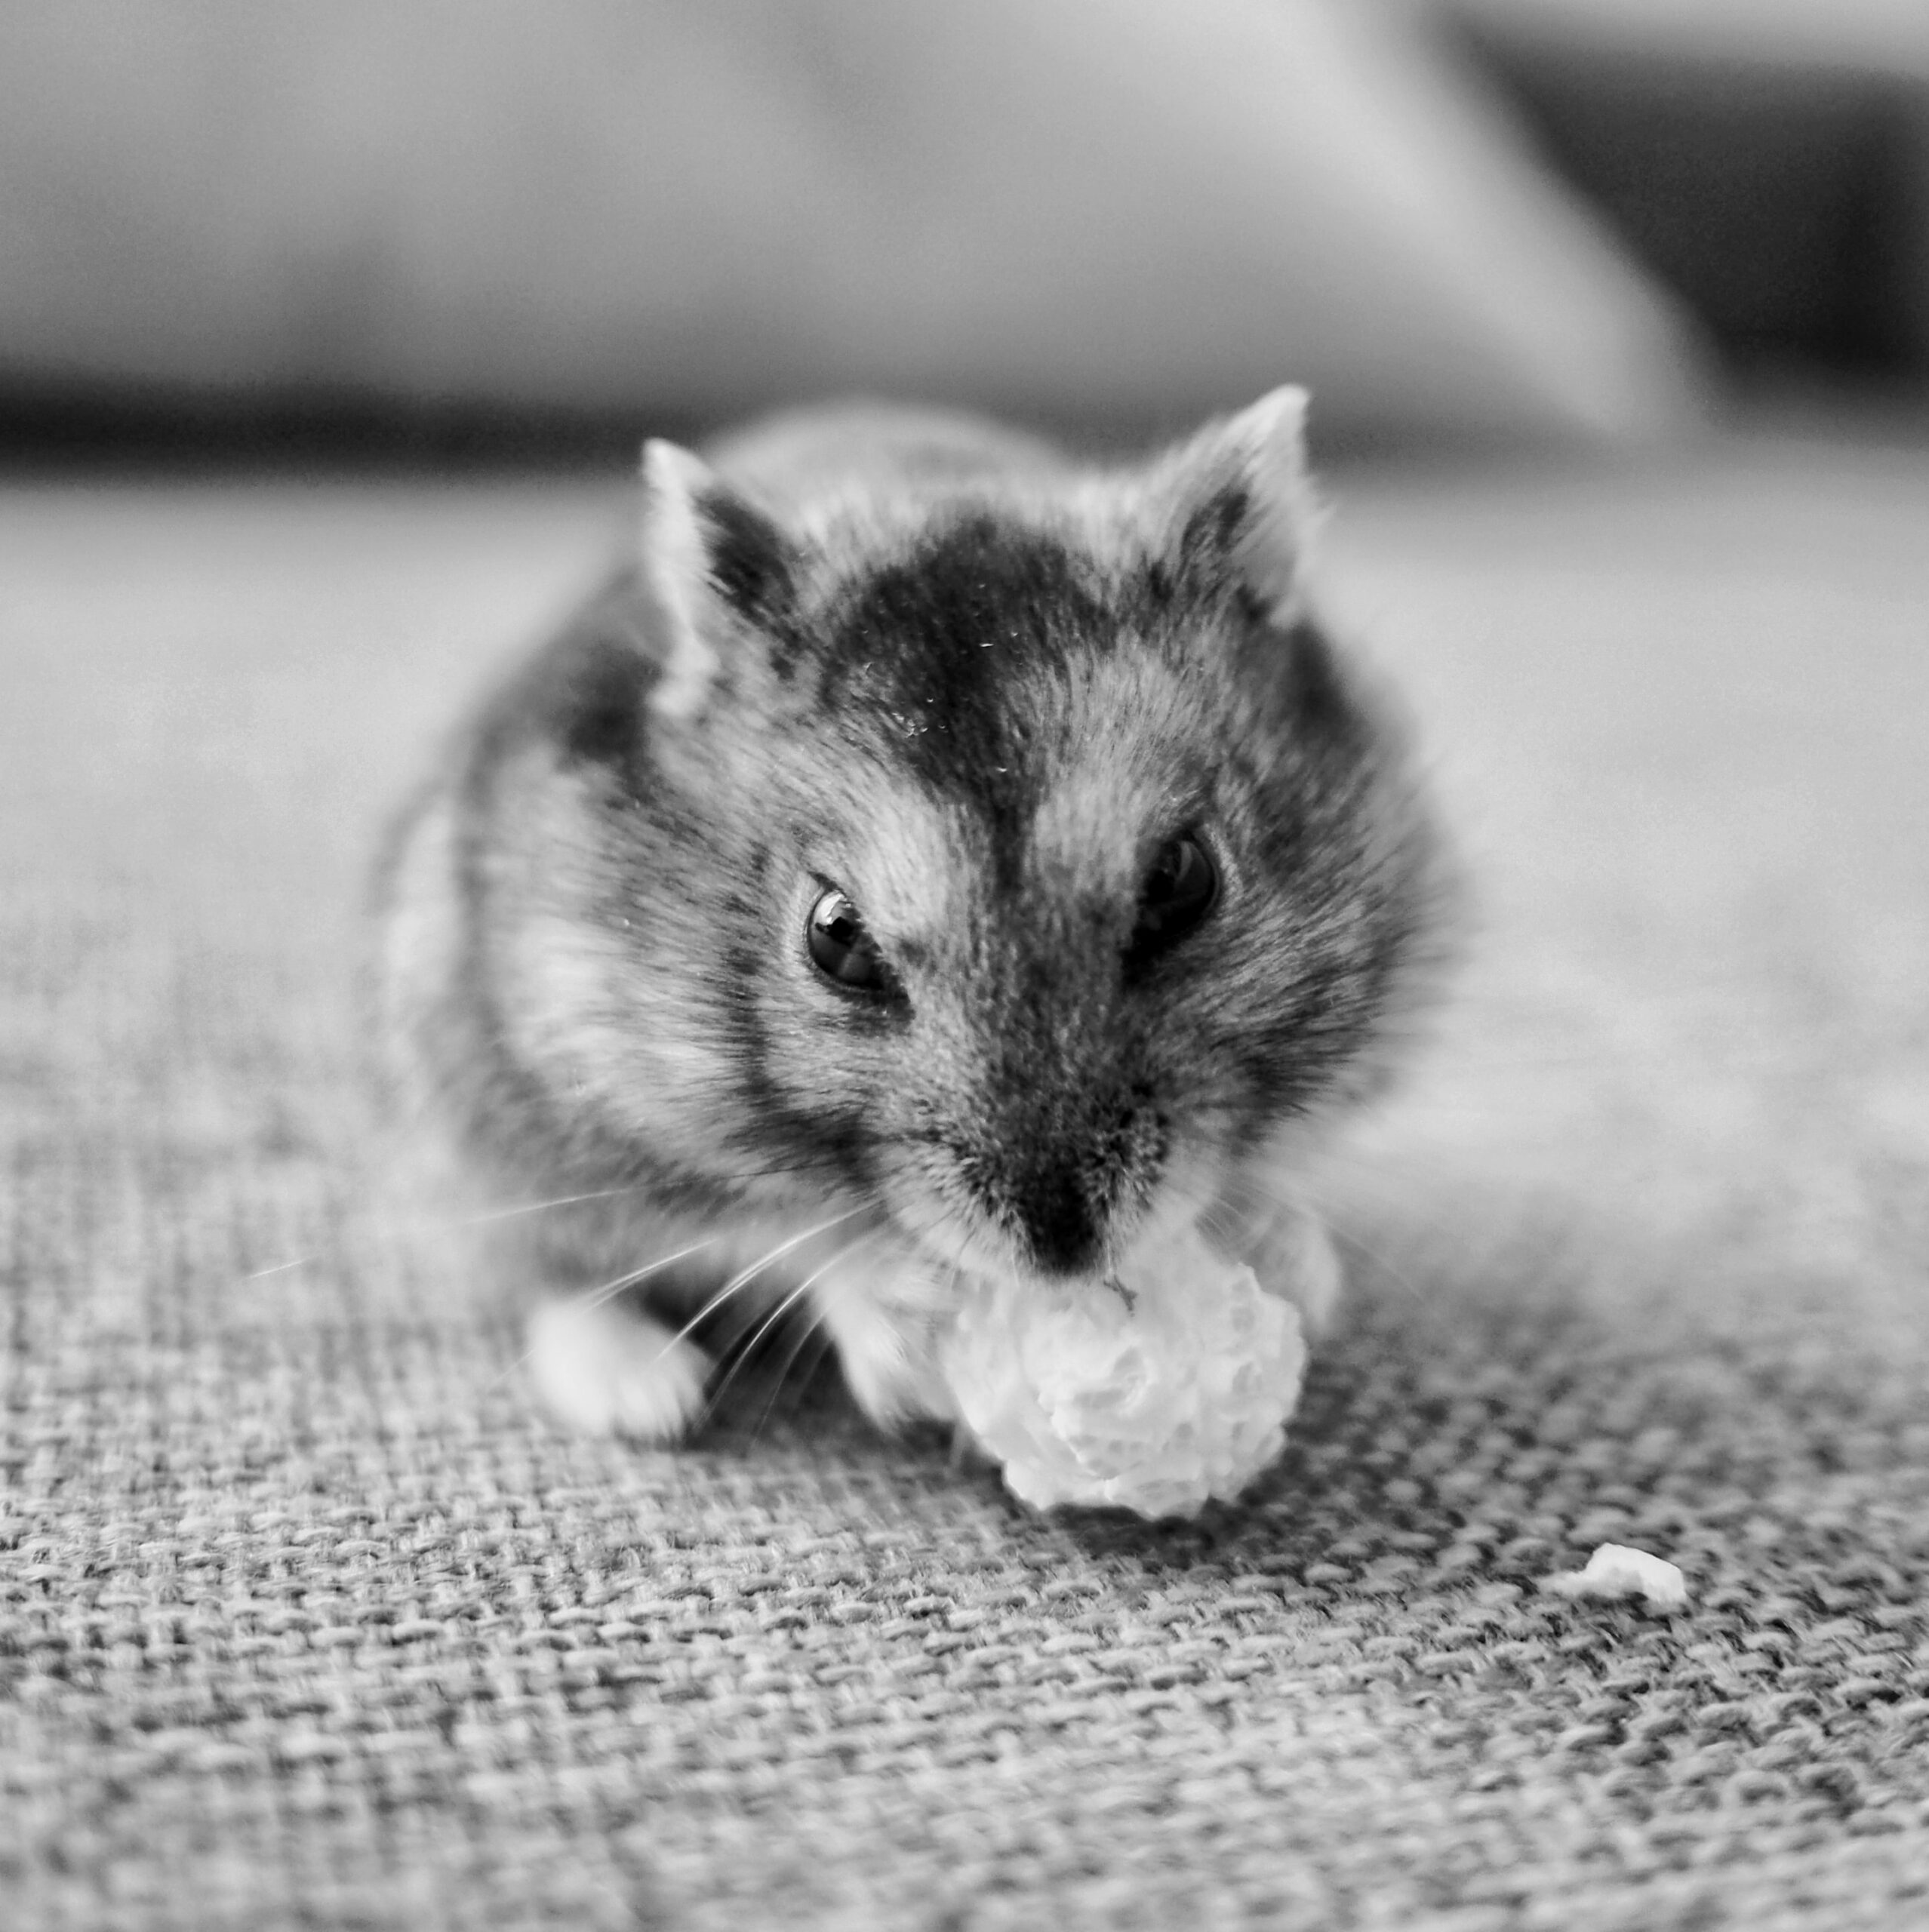 Do Hamsters Know When They're Dying?